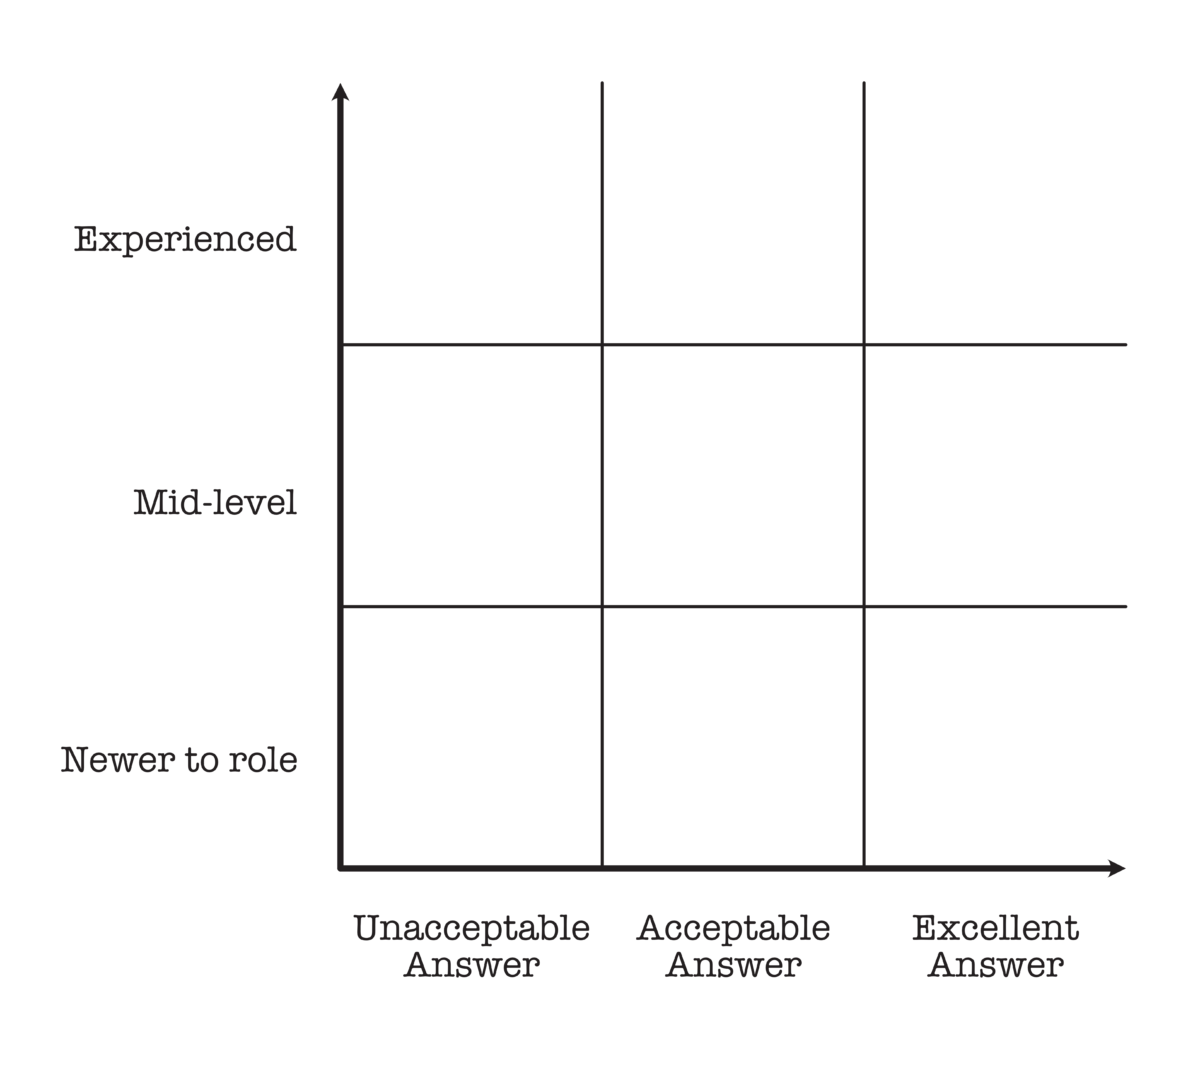 a grid demonstrating the two axes